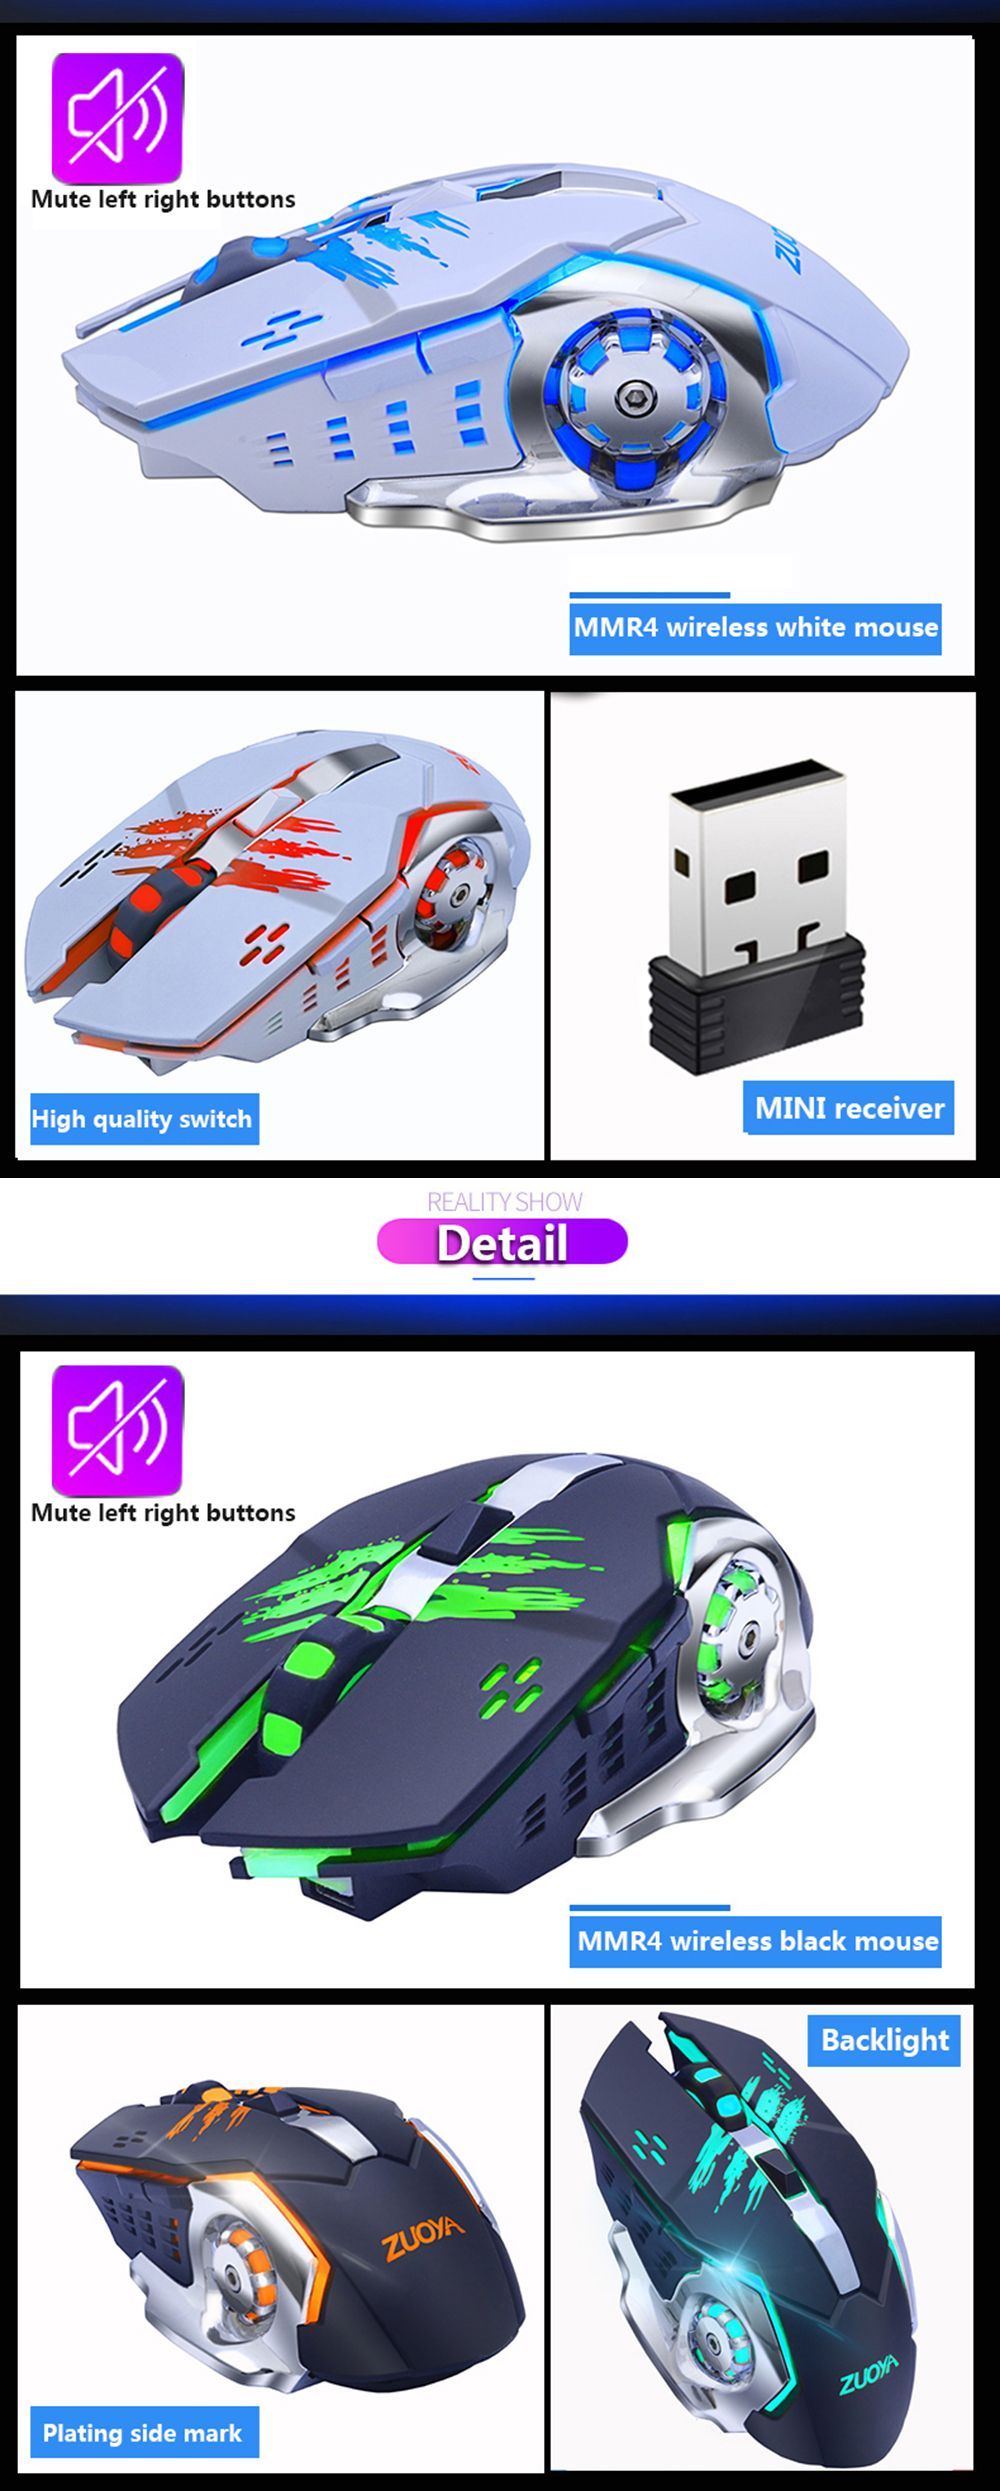 ZUOYA-MMR4-Wireless-Mouse-24GHz-Receiver-LED-Mute-Silent-Rechargeable-USB-Gaming-Computer-Optical-Ga-1614283